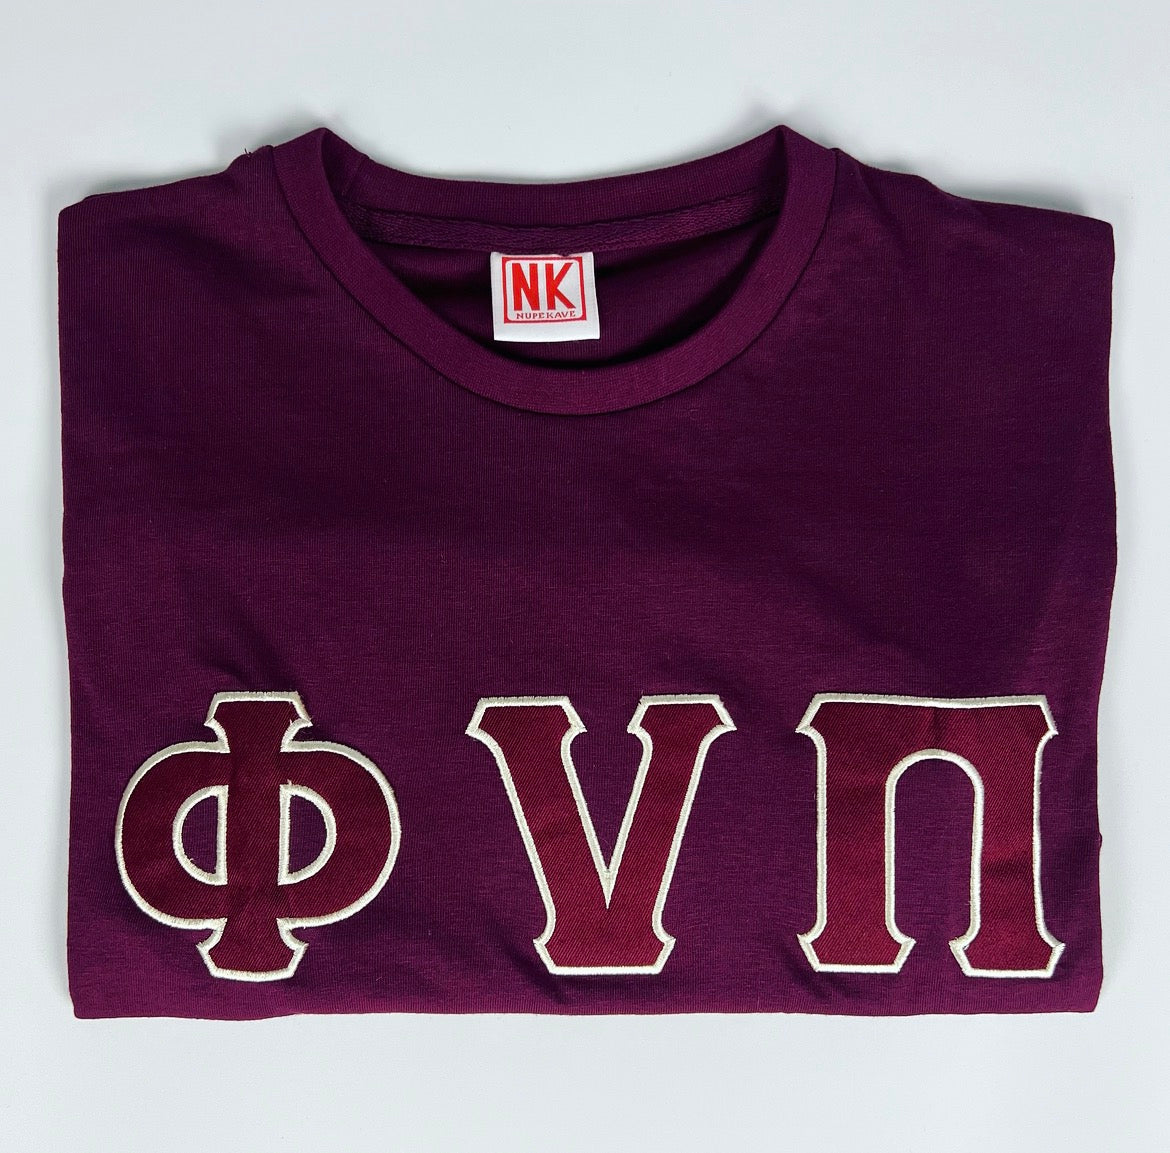 Nupe Kave Exclusive Kappa Alpha Psi Double Stitched Appliqué Embroidery Lettered T-shirt . This is the perfect short-sleeved shirt to wear while showing off your Kappa Alpha Psi fraternity lettering. A comfortable 100% cotton tee with a twill Greek letters embroidery across the chest give you the perfect fit. This shirt is also a perfect gift for your favorite Kappa Man.